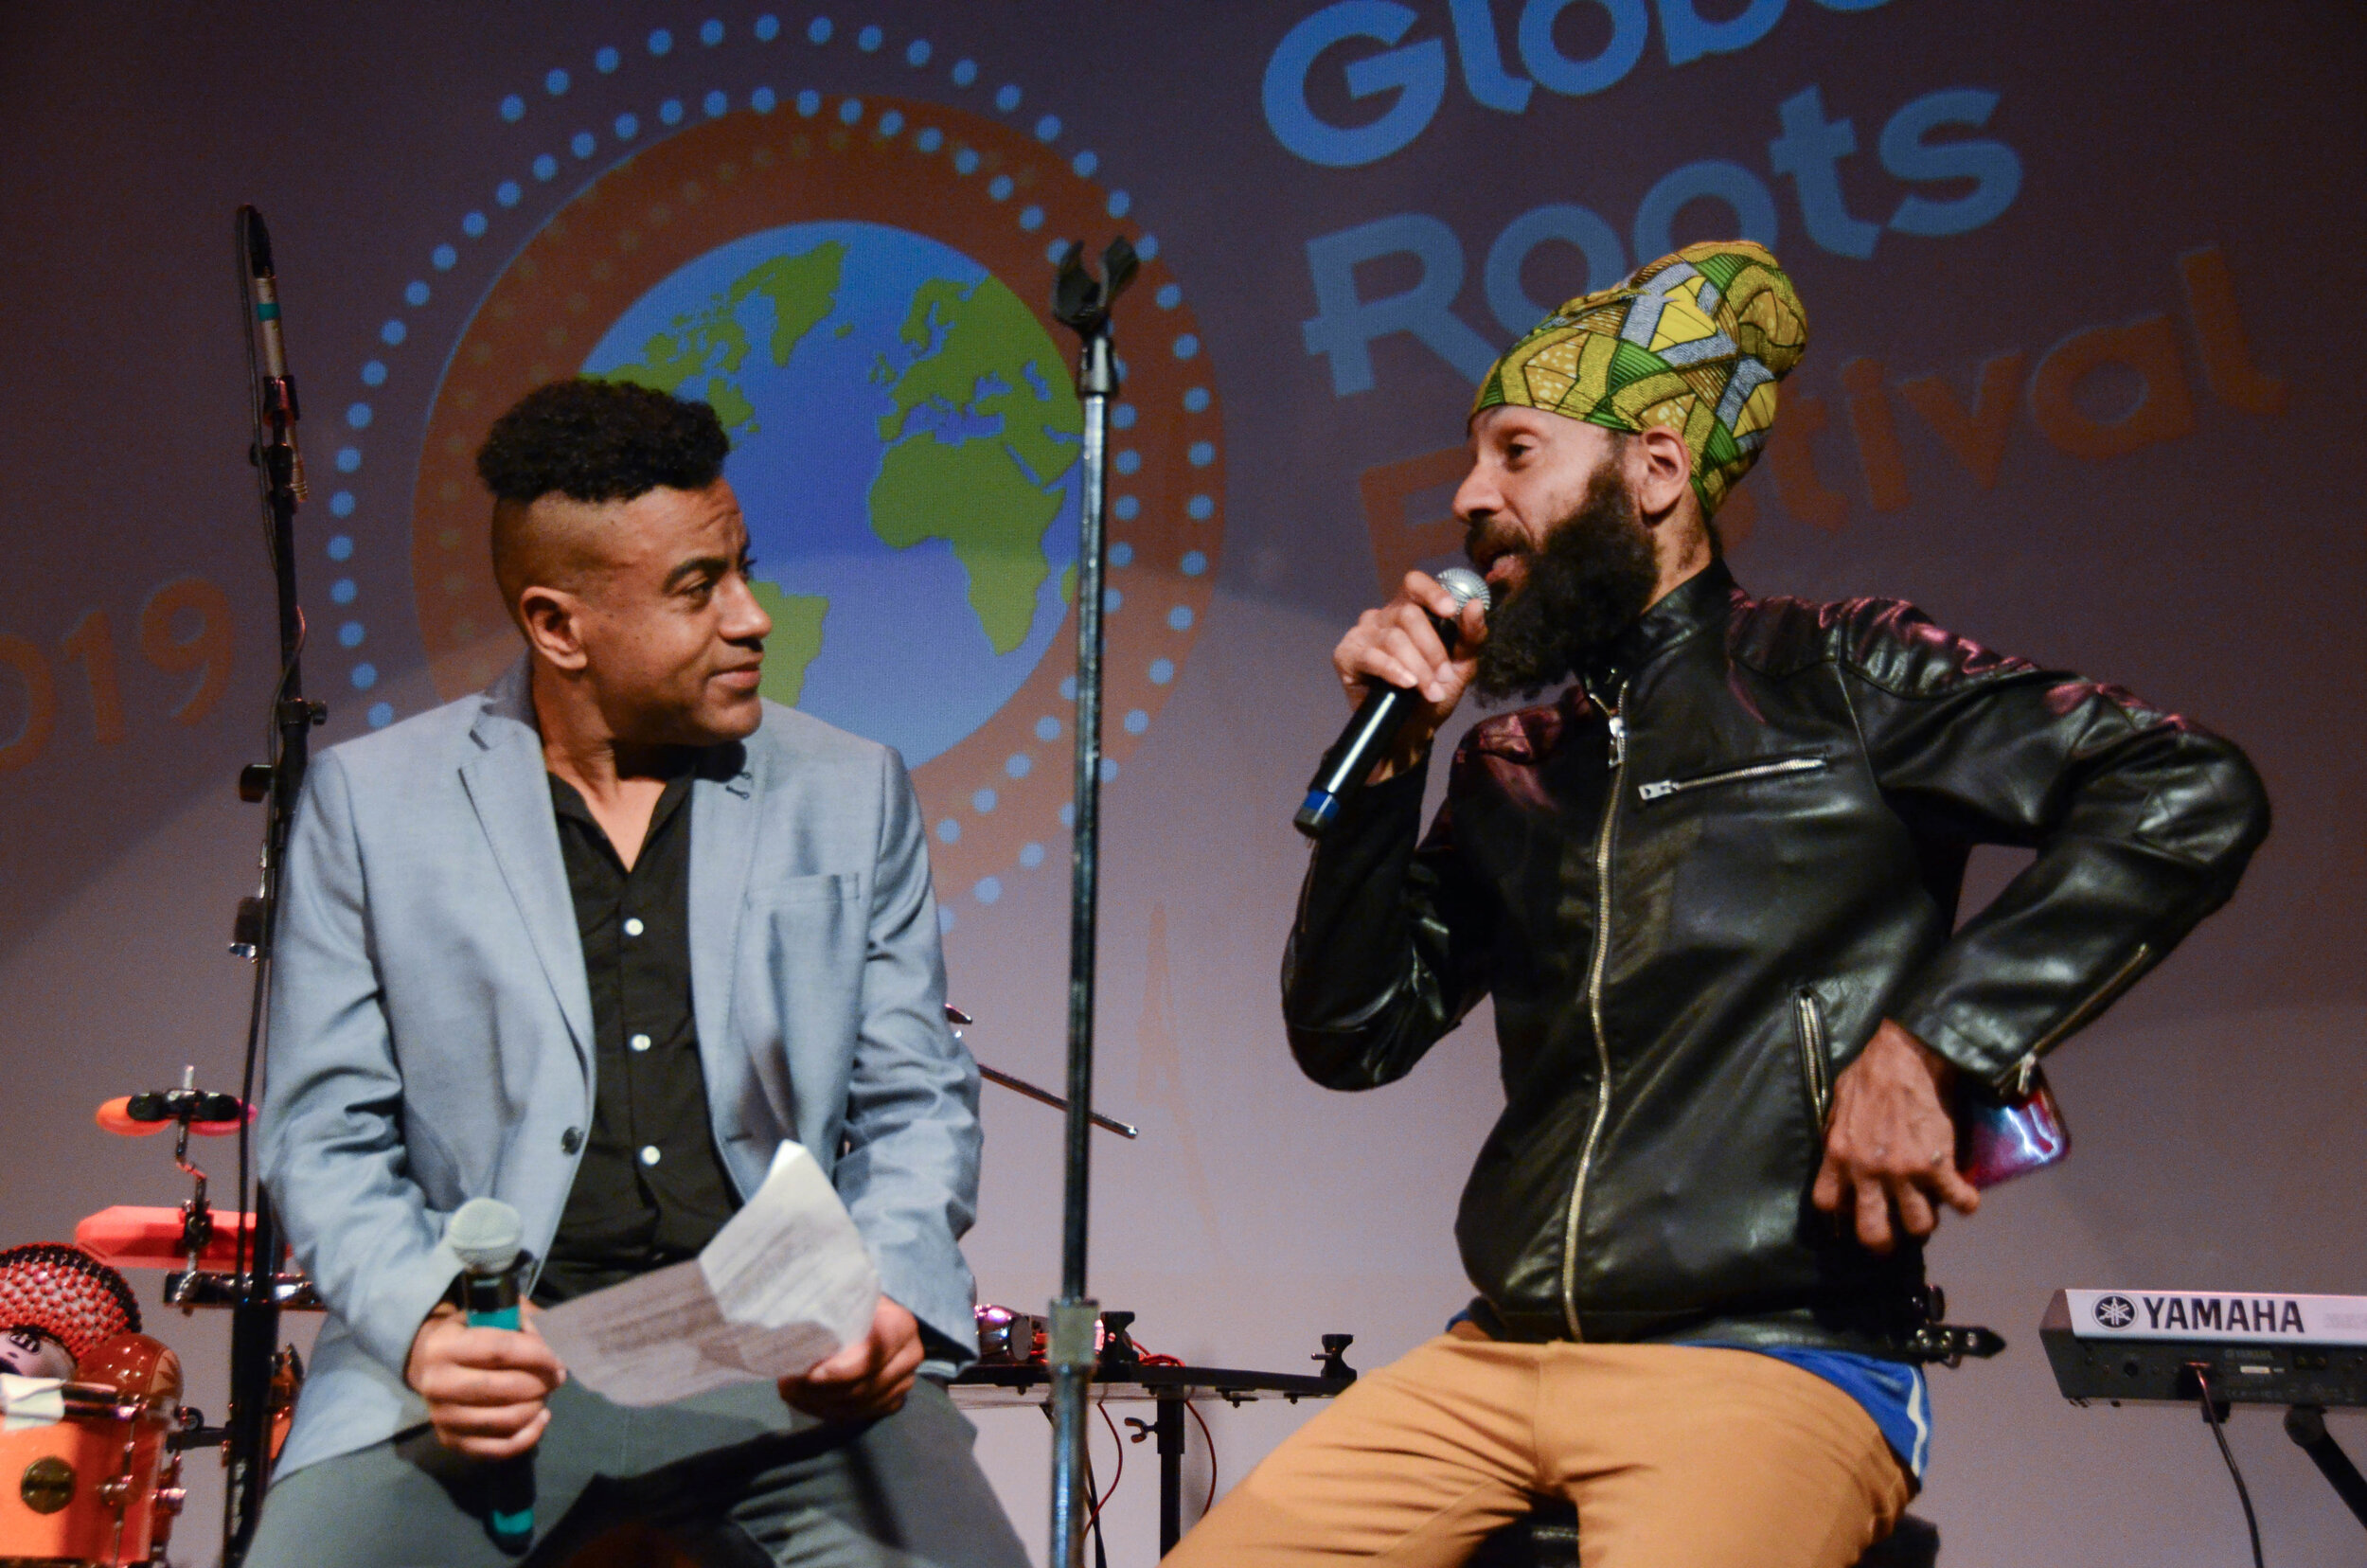 Executive Director David Hamilton interviews Afro-Argentinian Reggae icon Fidel Nadal for the 2019 Global Roots Festival